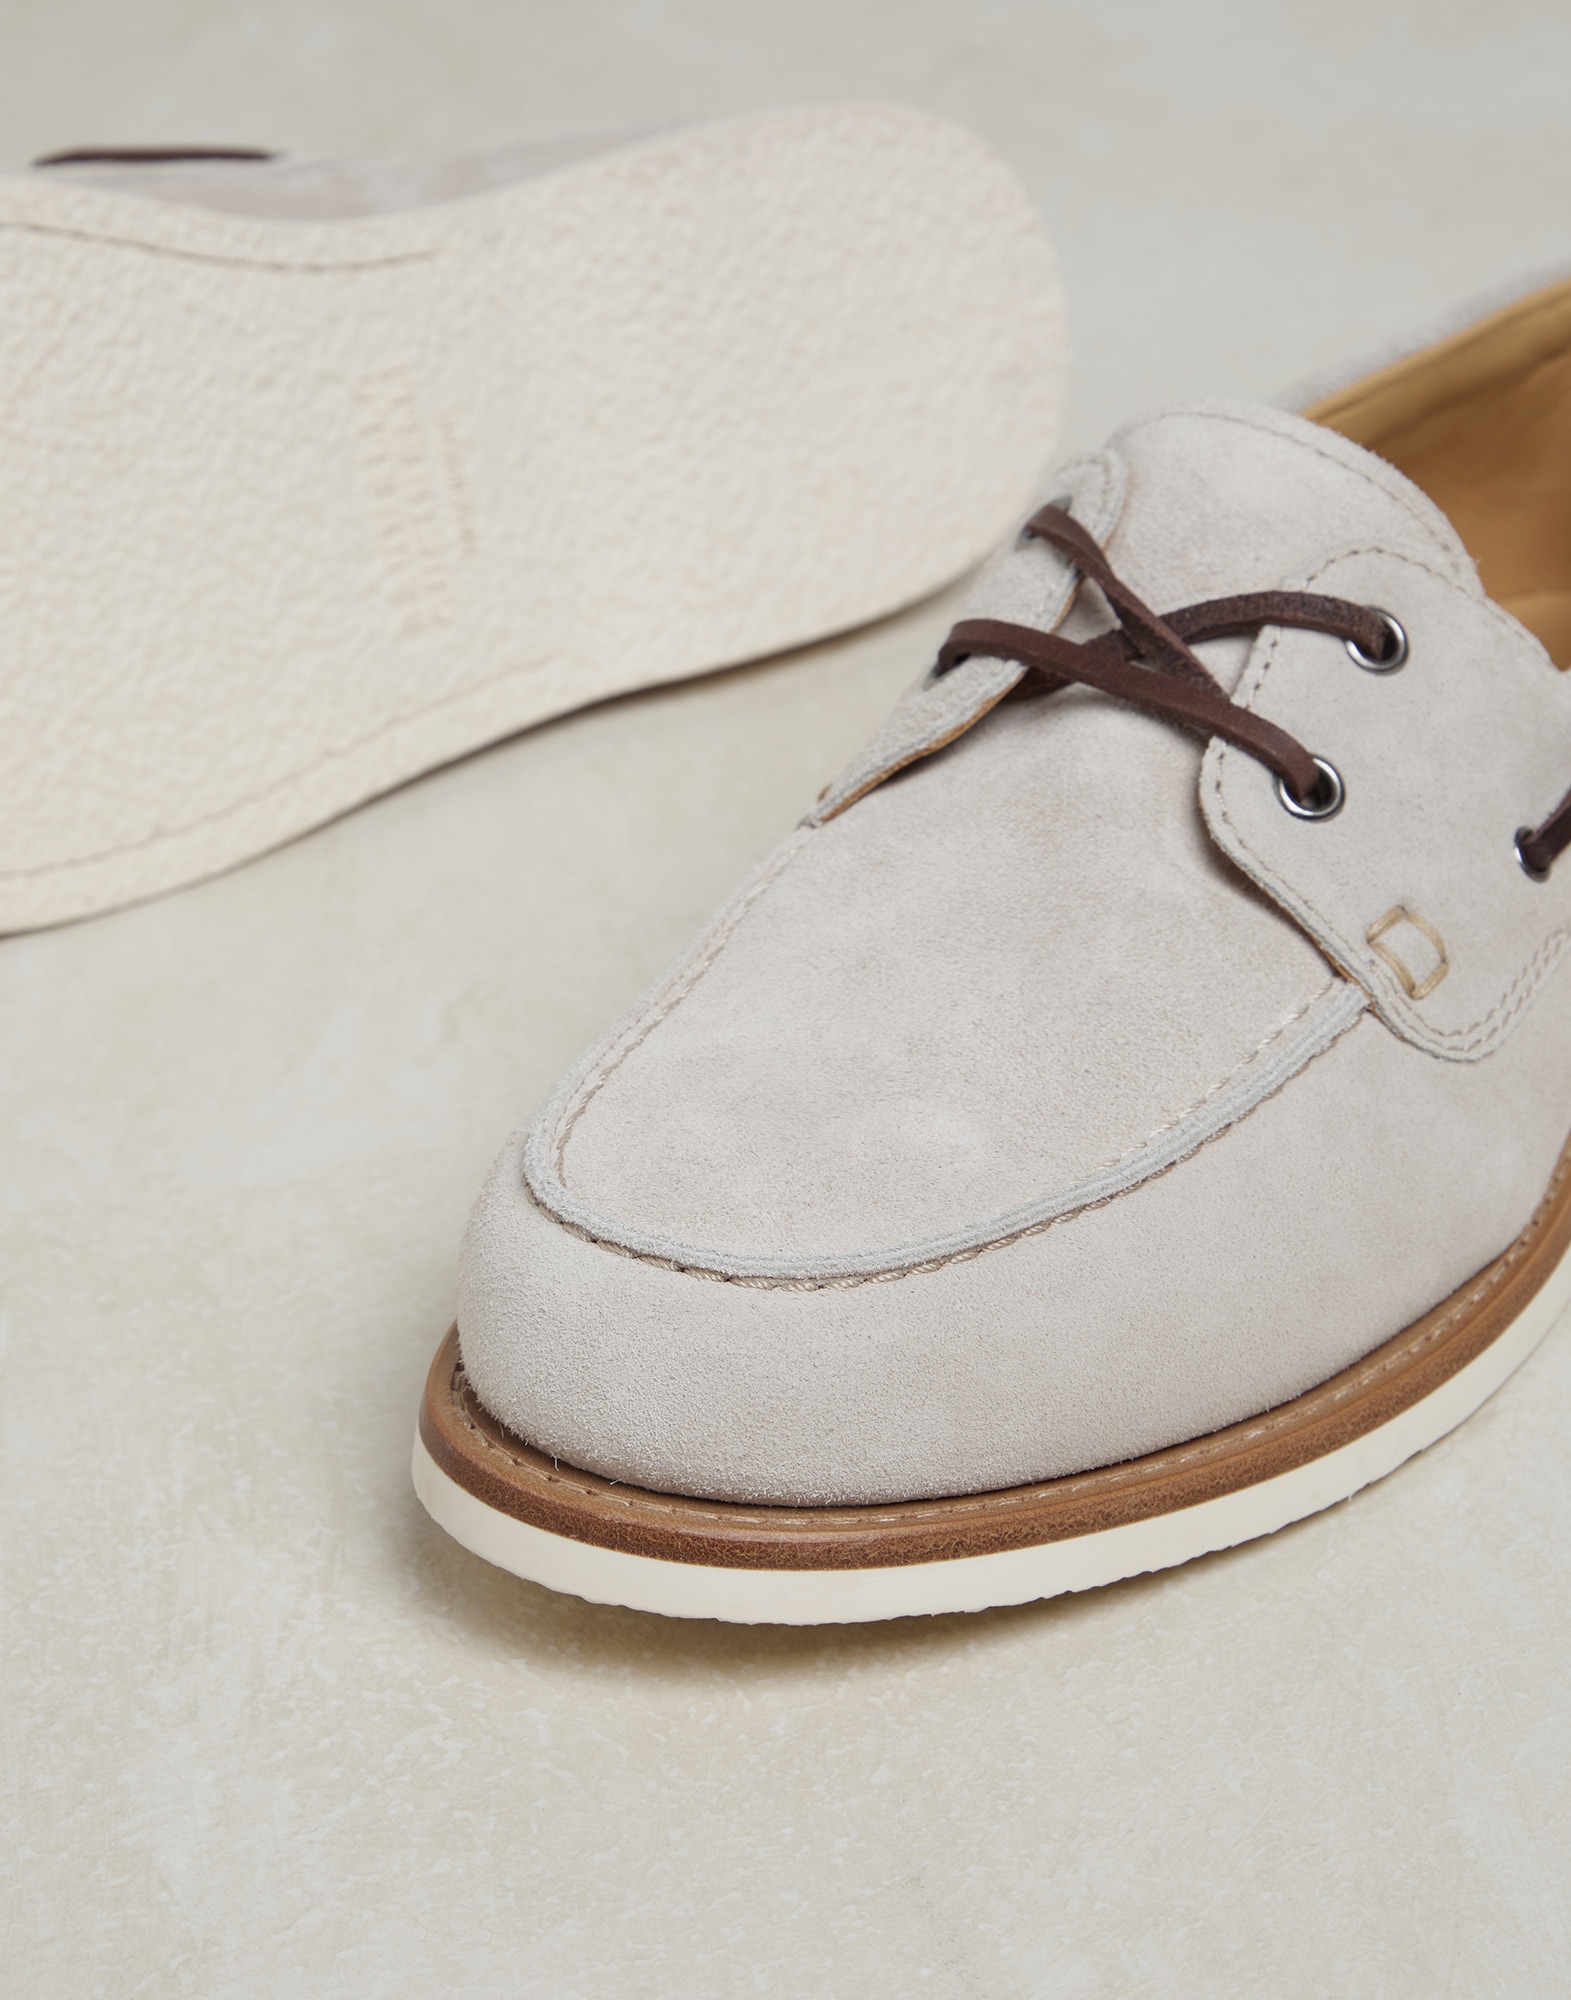 Men's leisure shoes: casual loafers and boat shoes | Brunello Cucinelli